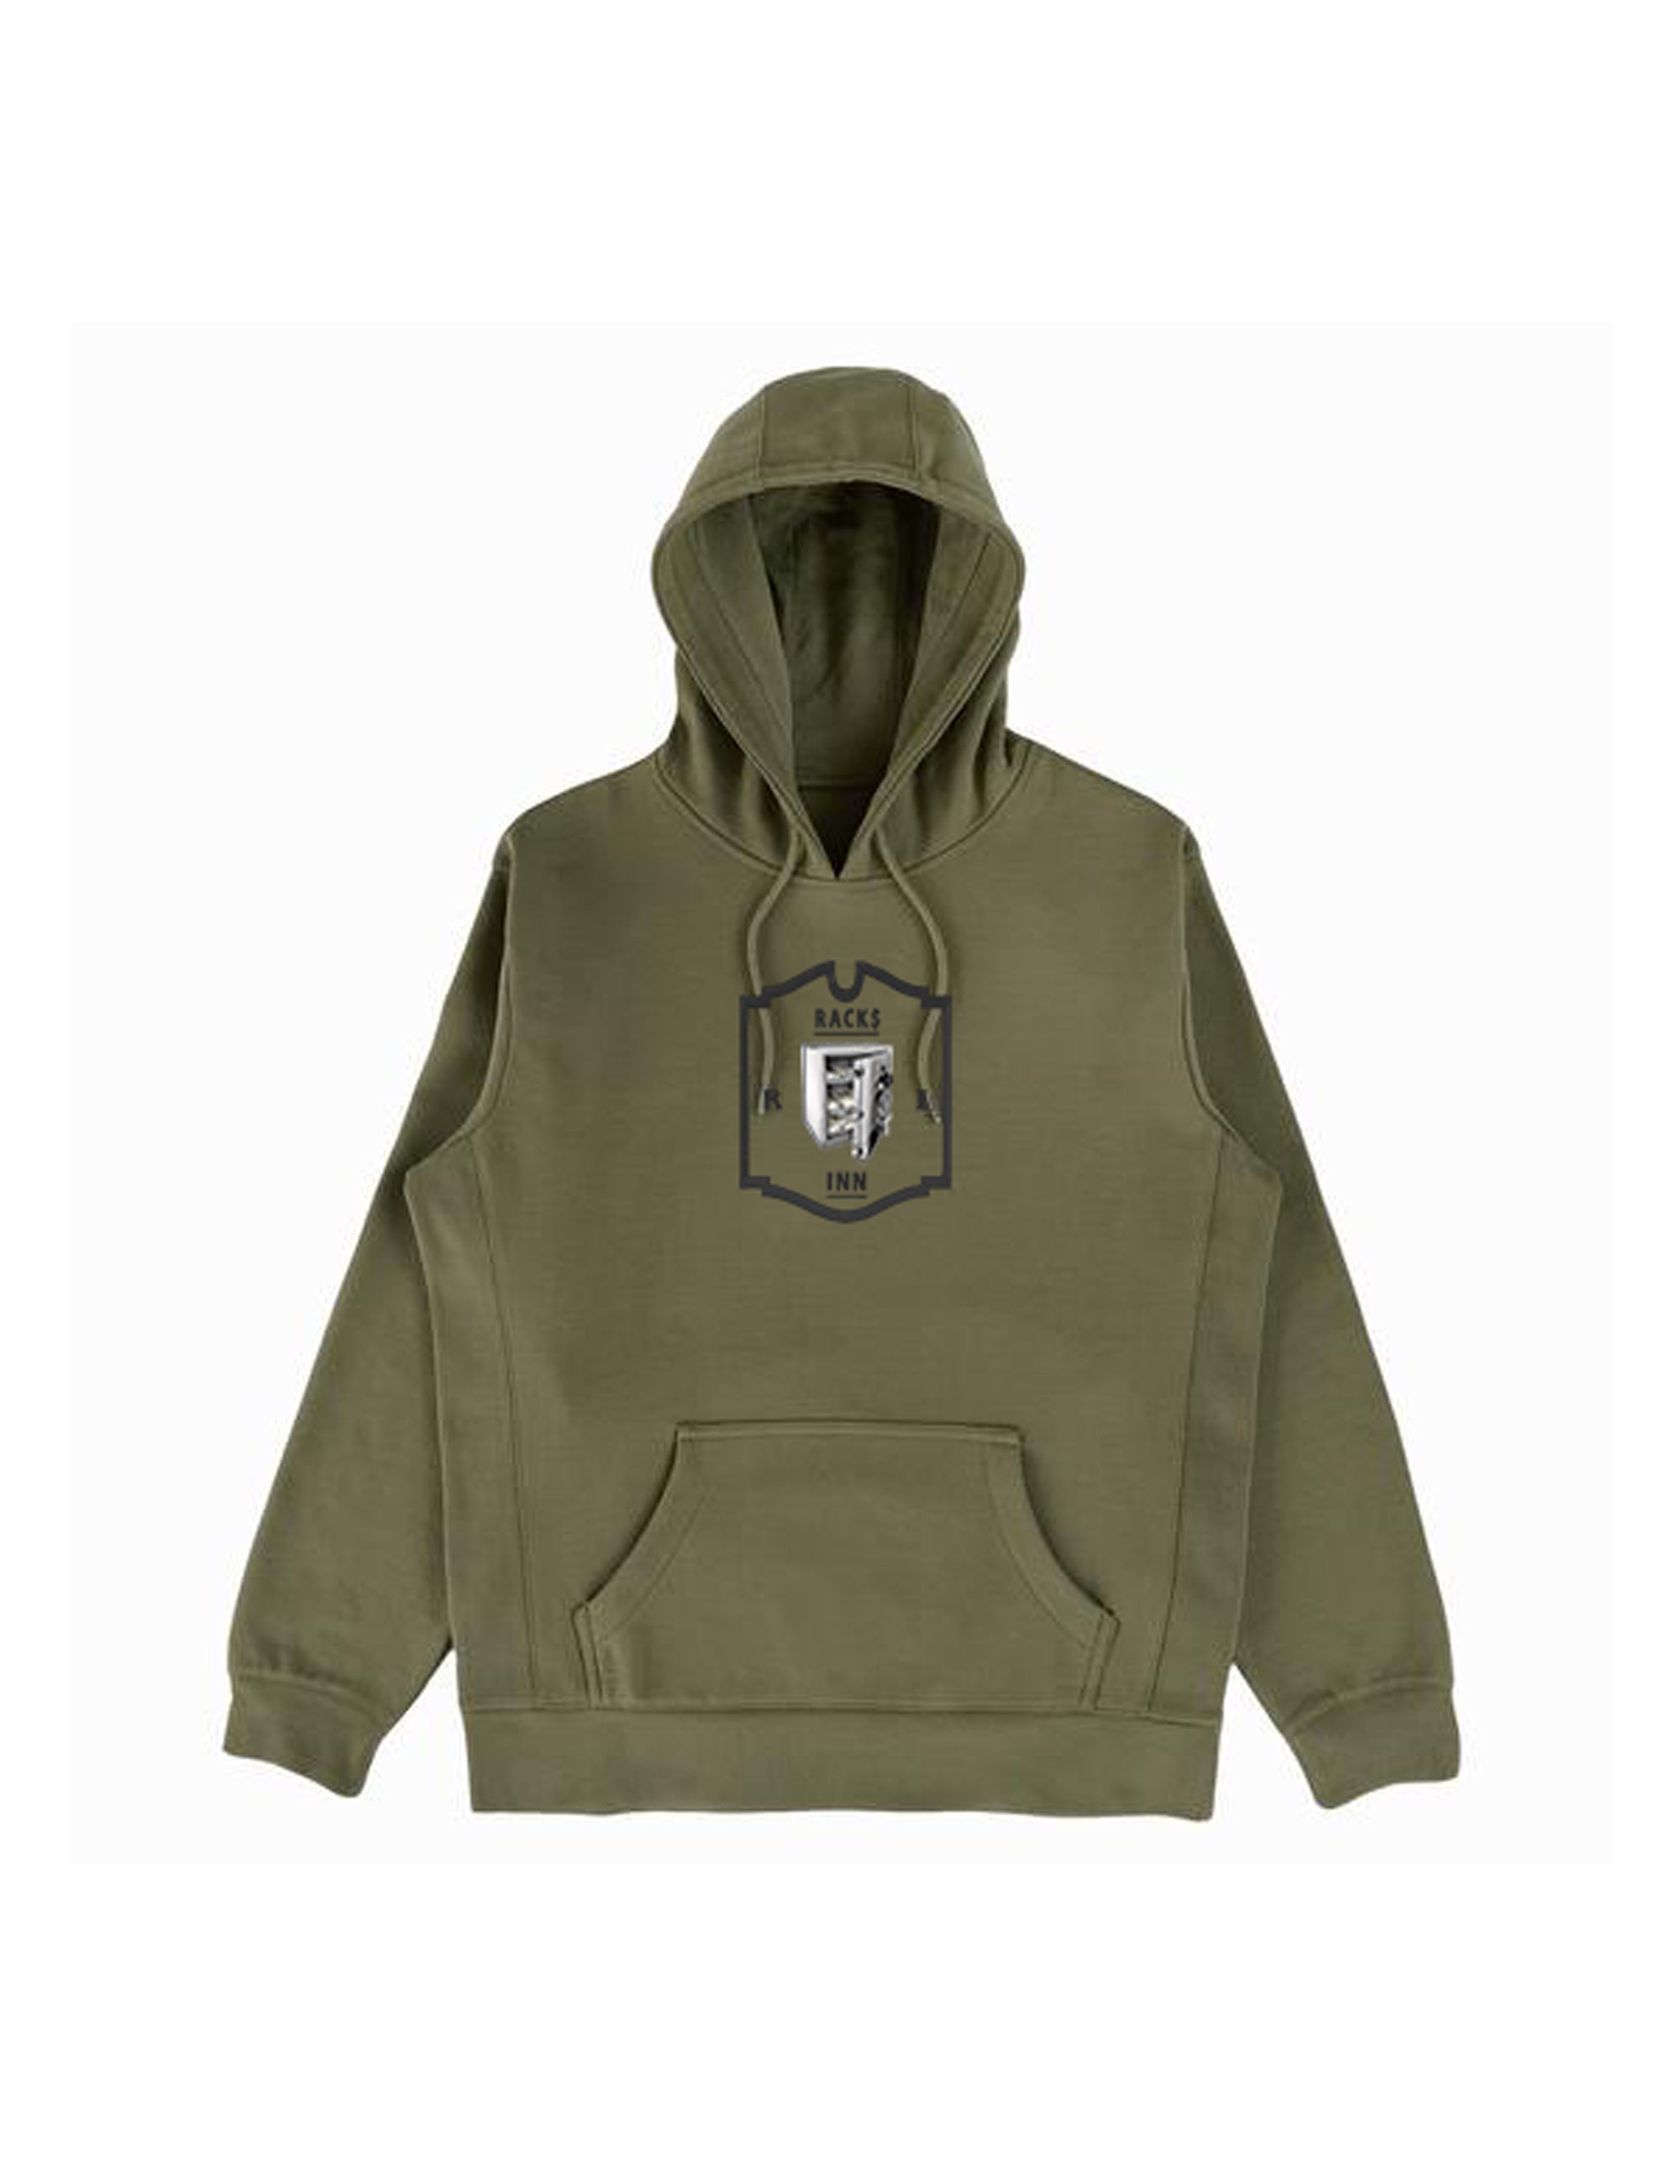 Money Vault Pullover Hoodie - Military Olive